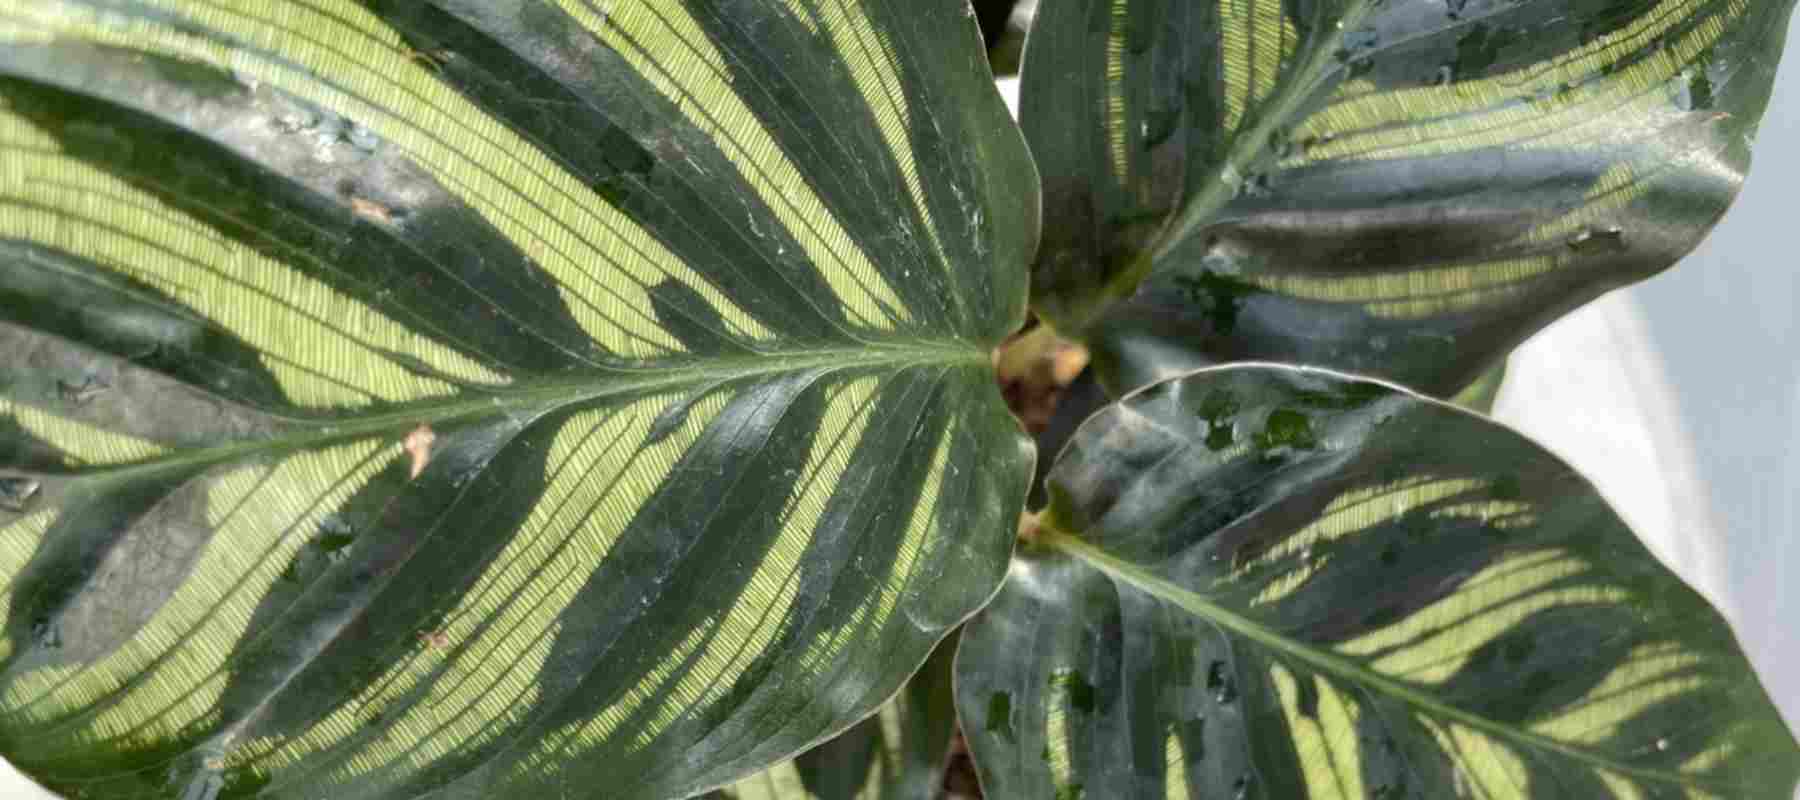 closeup image of calathea plant with portions of three leaves with stripes of dark and light green